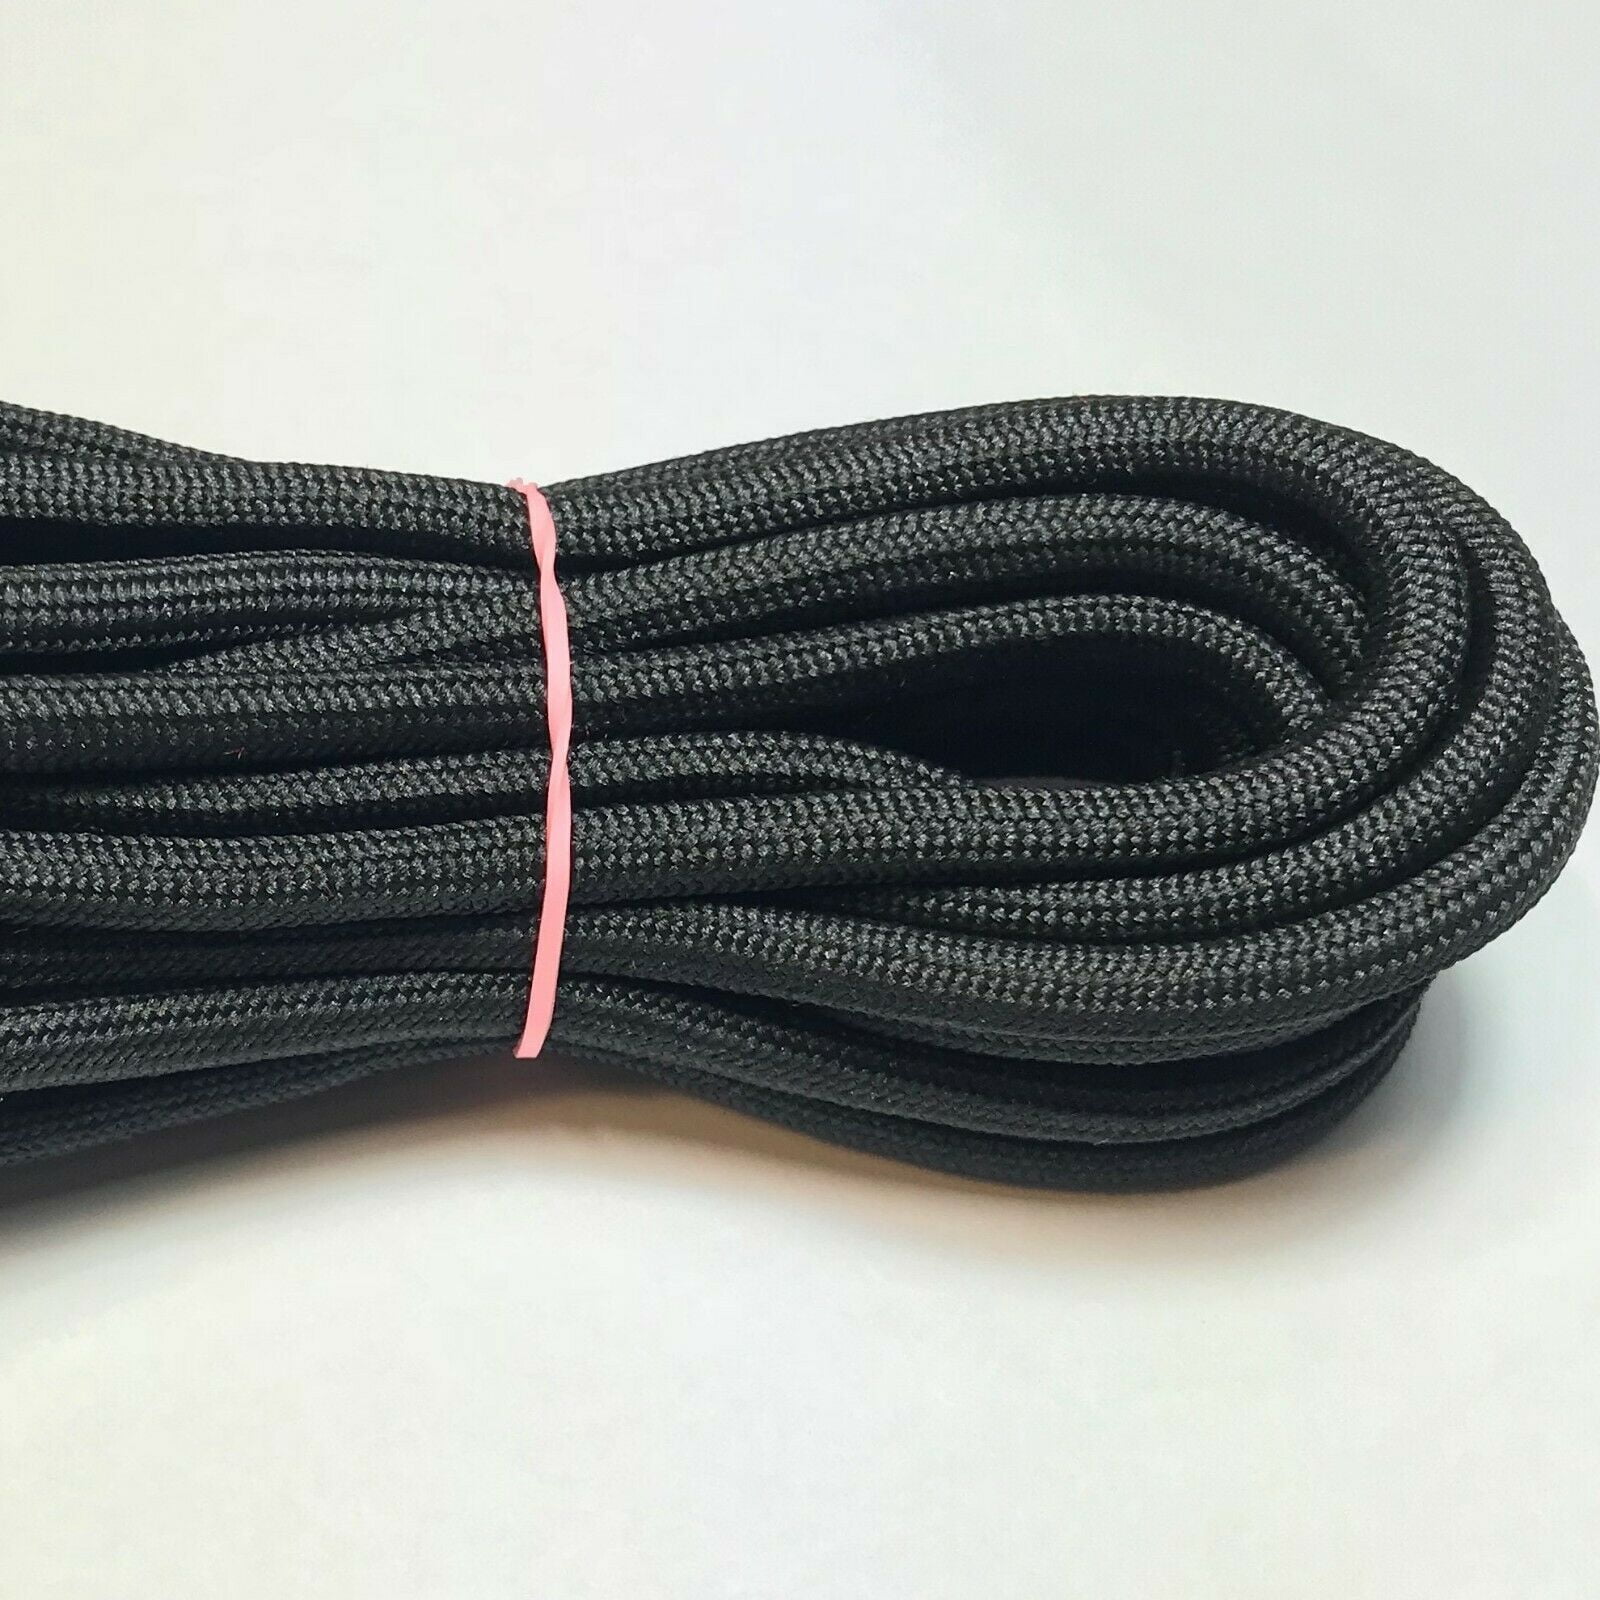 Heavy duty Black round boot laces shoelaces for hiking walking work boots shoes 